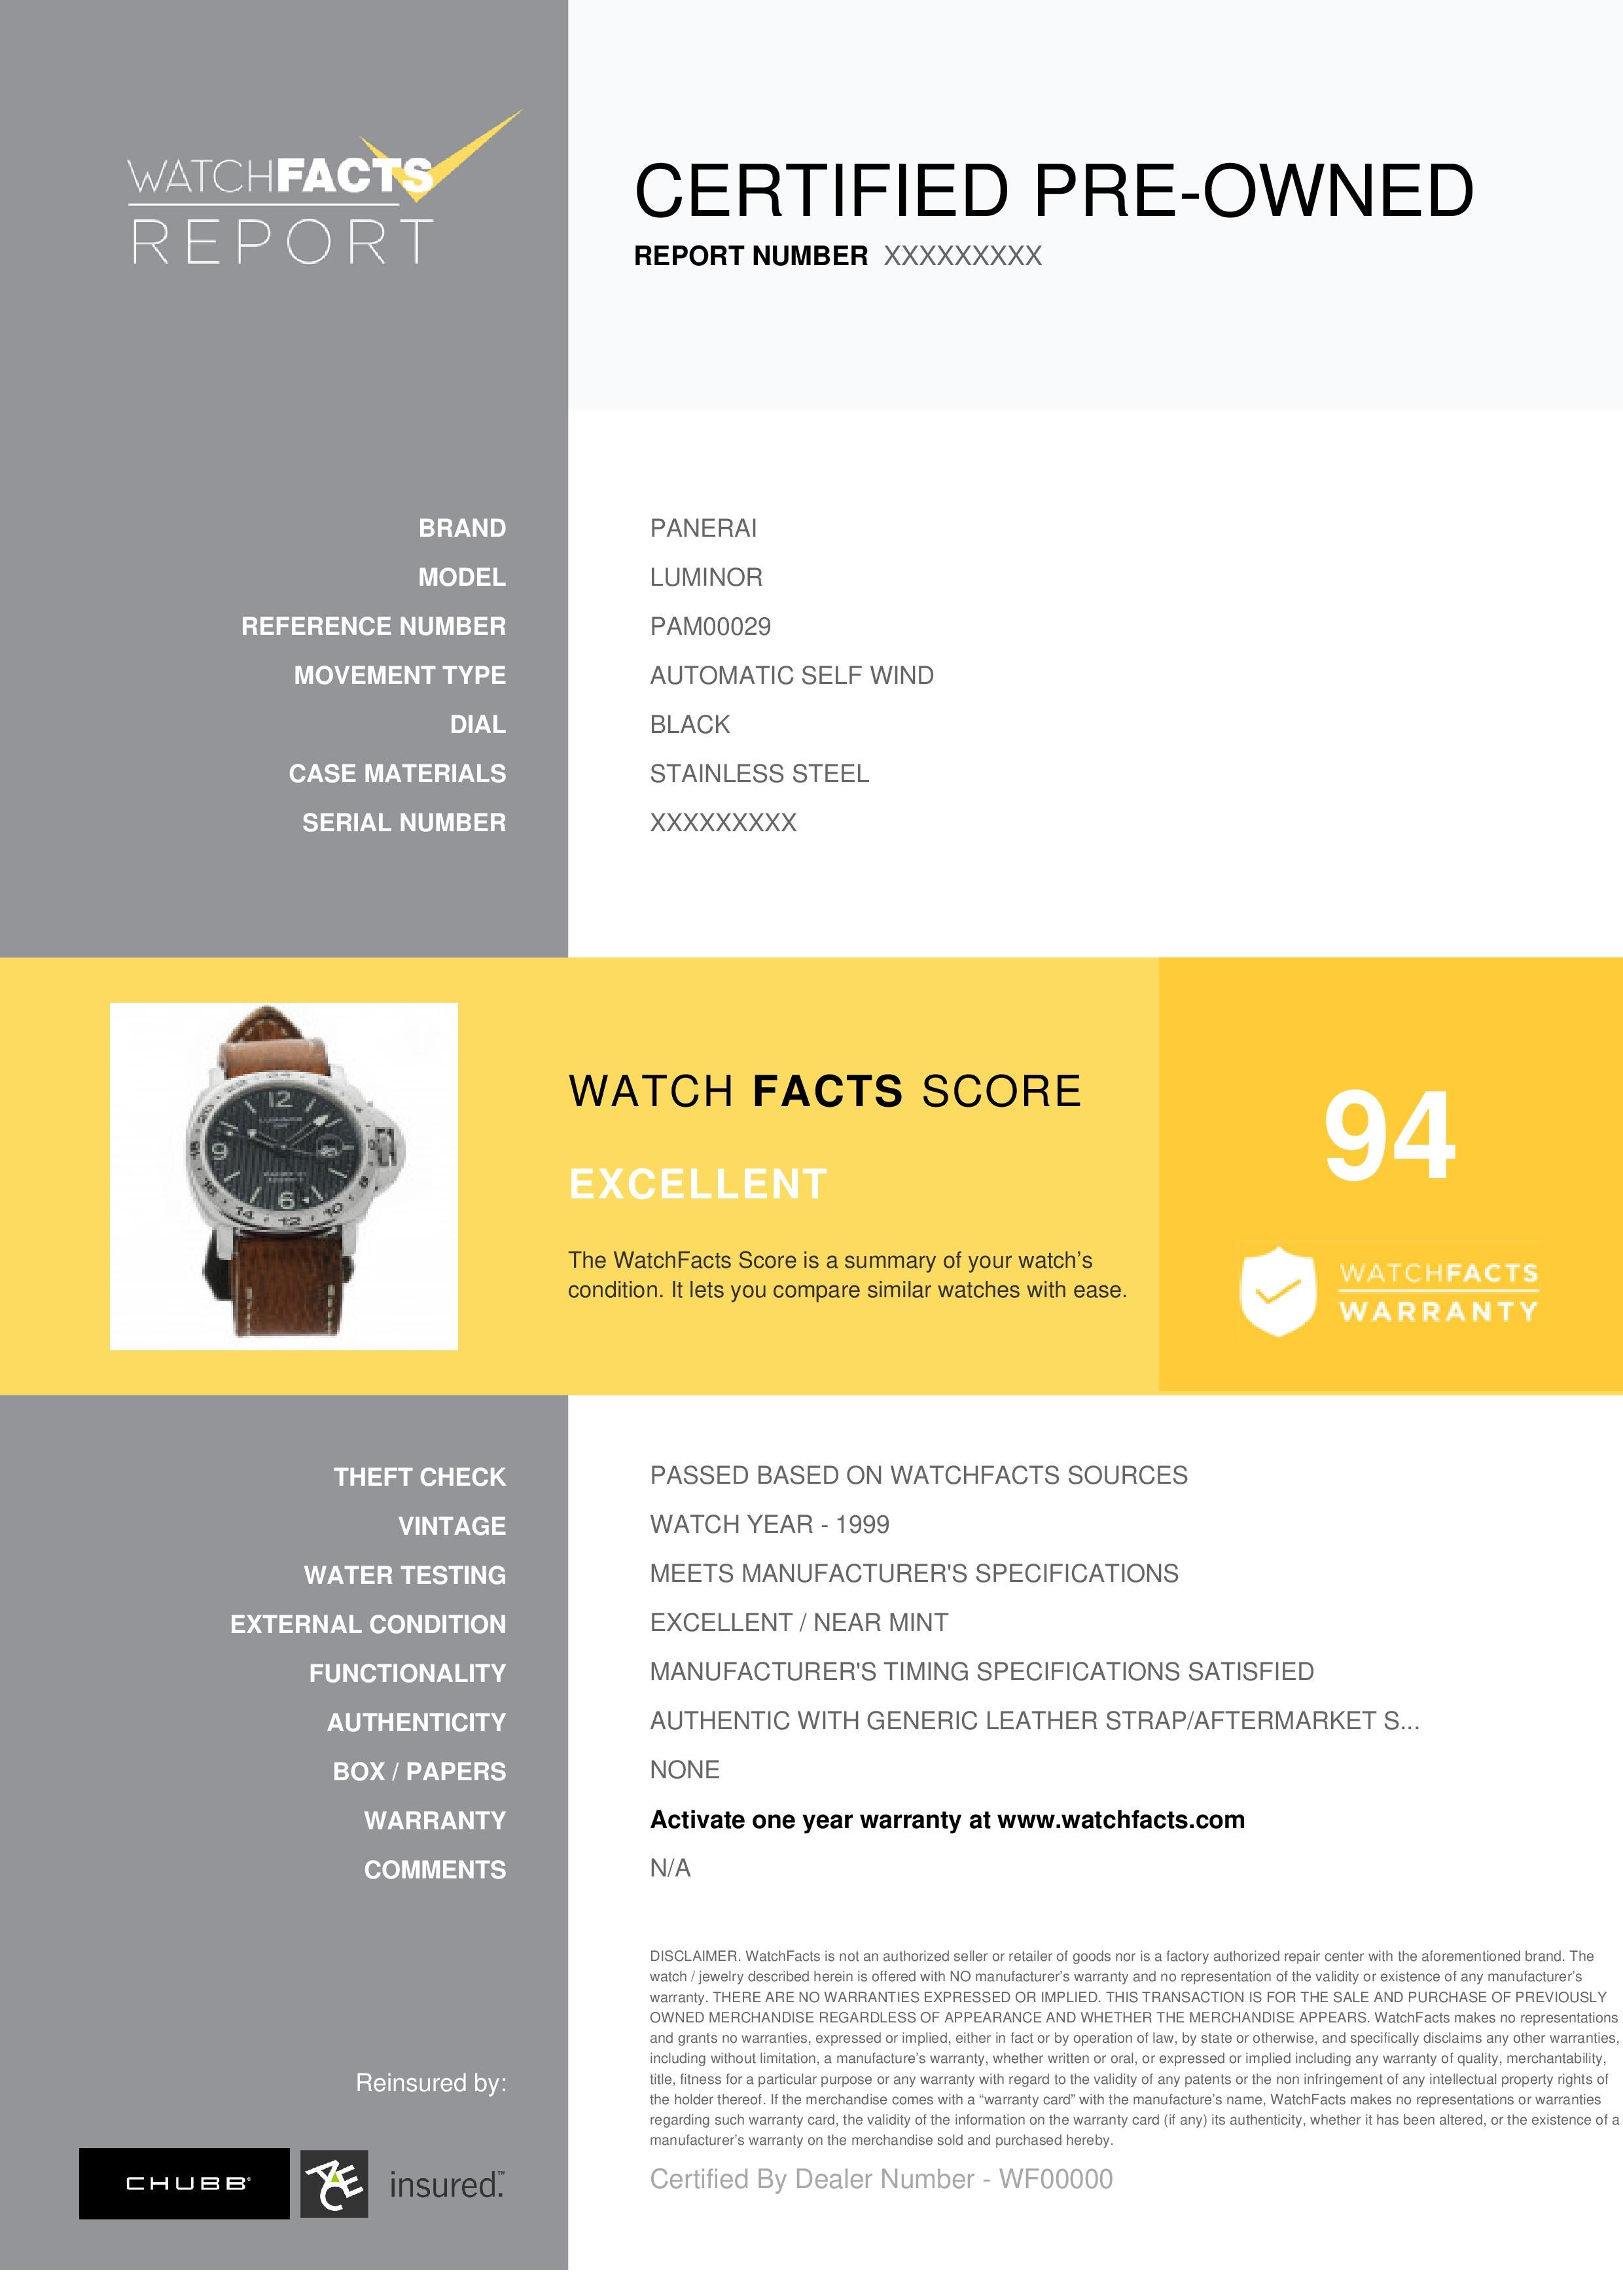 Panerai Luminor Reference #: PAM00029. Mens Automatic Self Wind Watch Stainless Steel Black 44 MM. Verified and Certified by WatchFacts. 1 year warranty offered by WatchFacts.
